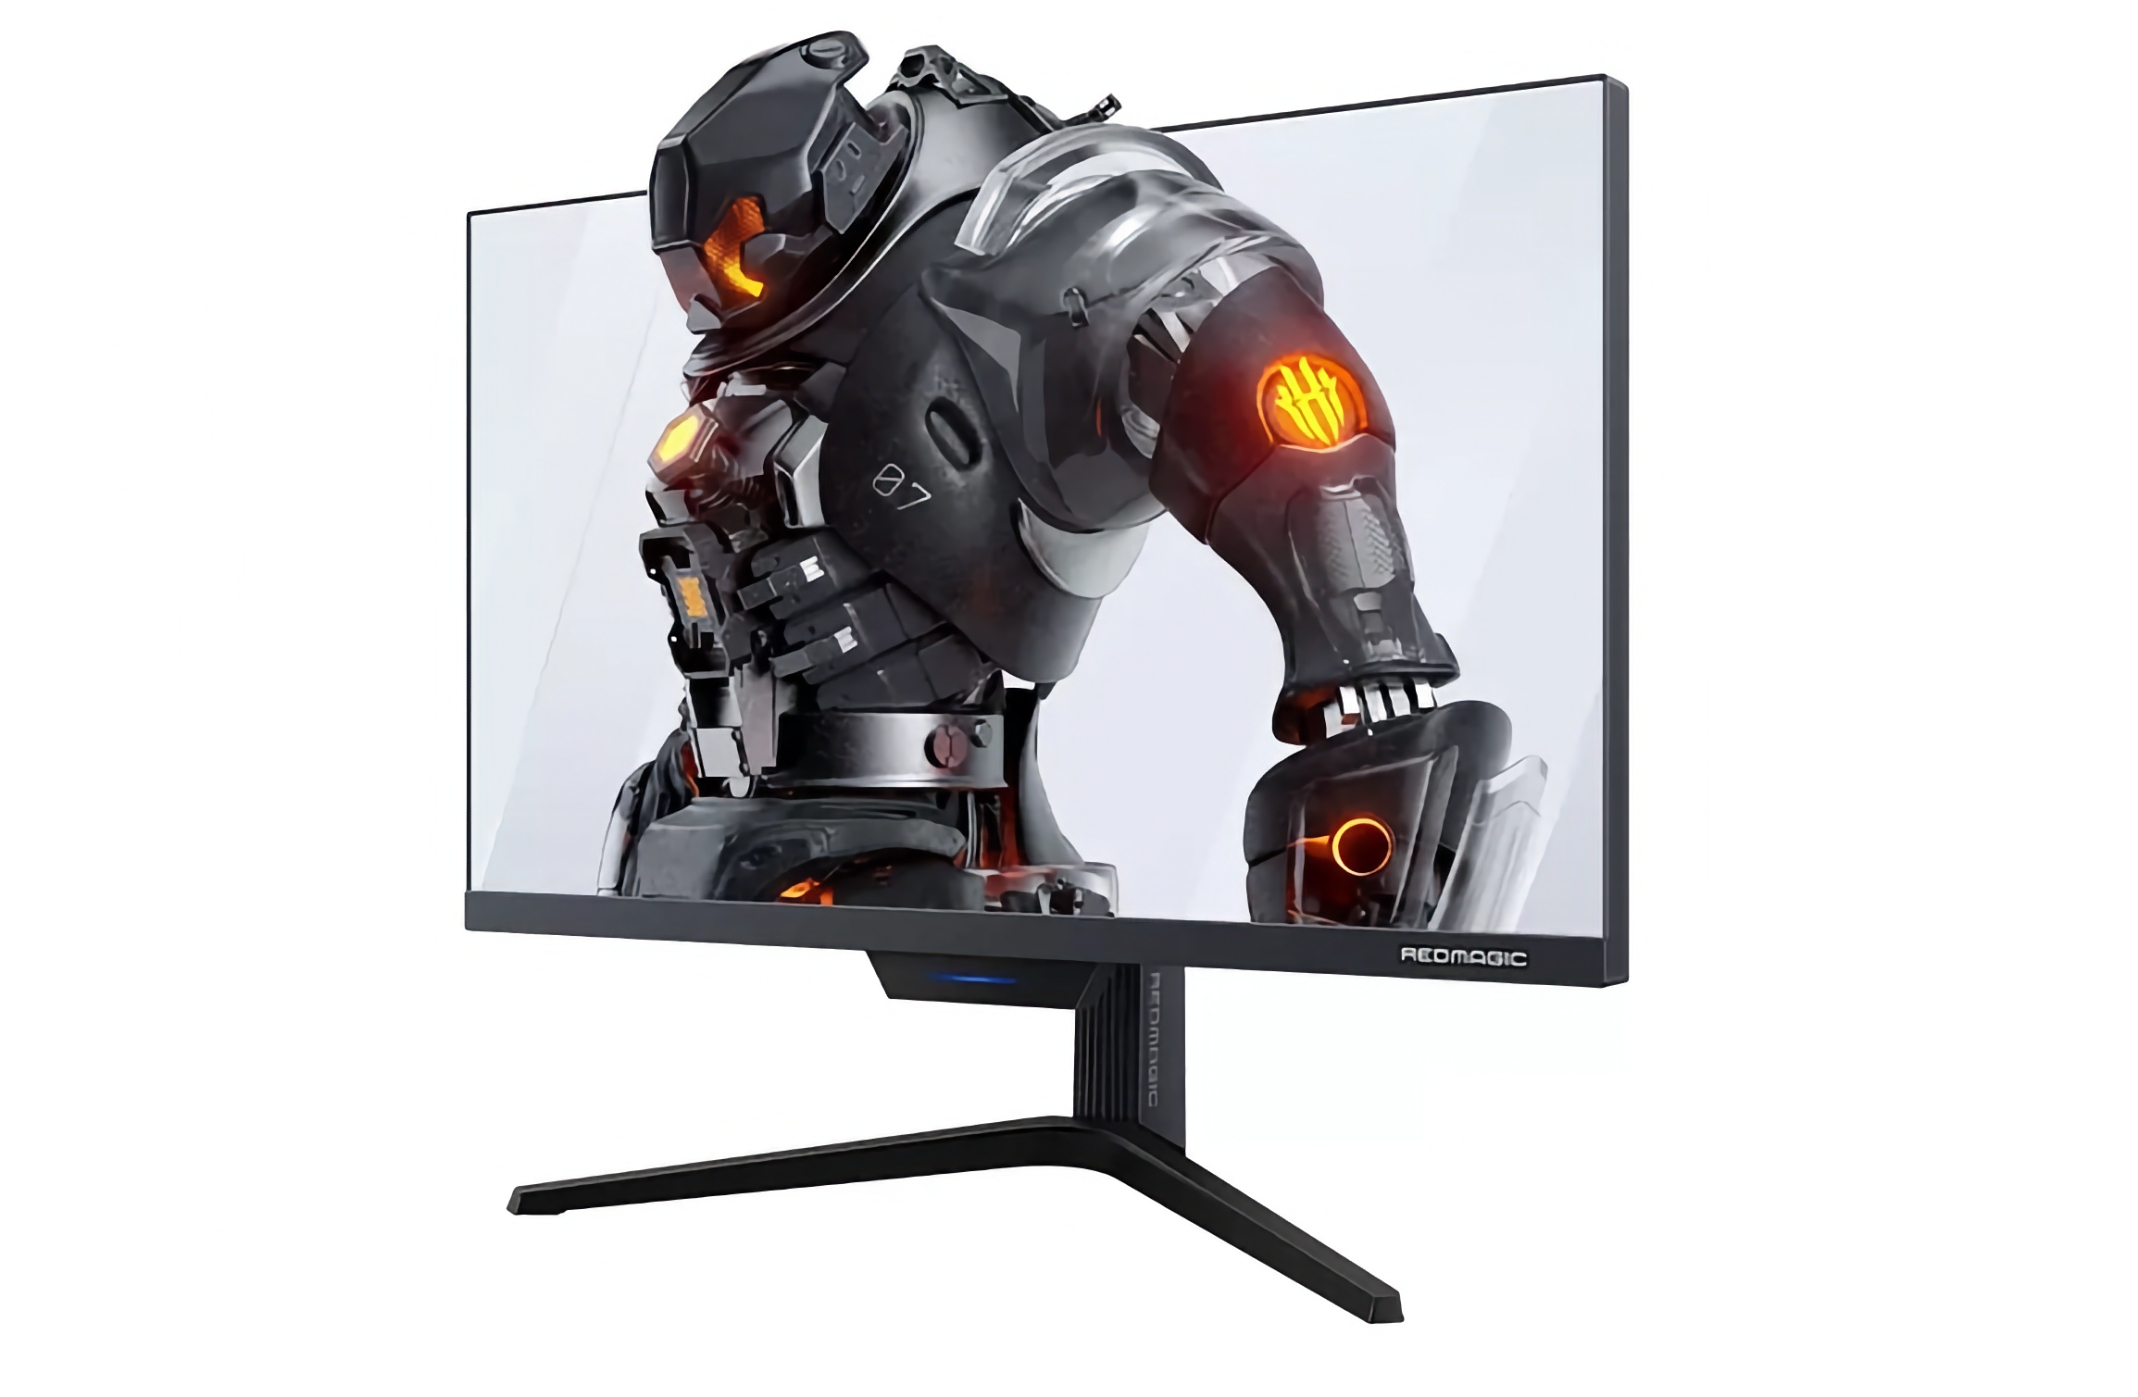 Nubia announced a gaming monitor Red Magic with 27-inch screen, 2K resolution and support for 240 Hz